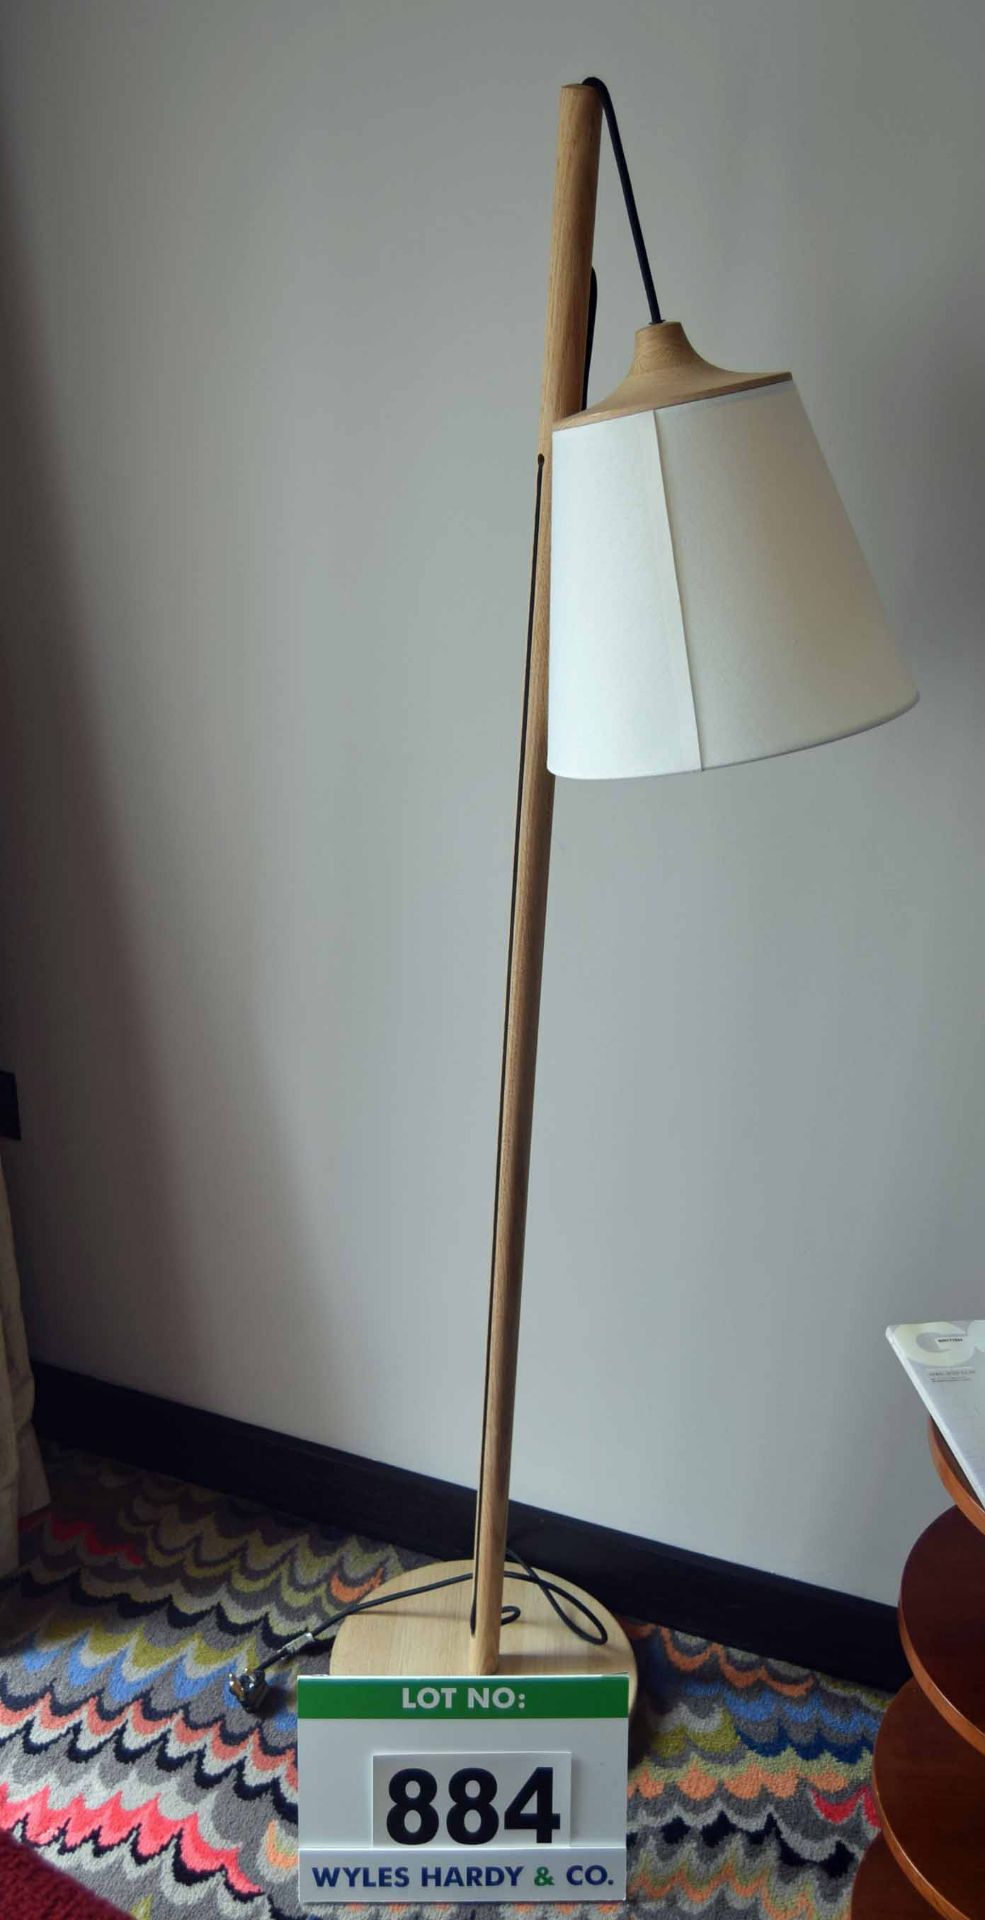 An Ash Framed Hanging Floor Lamp with Cream Fabric Shade